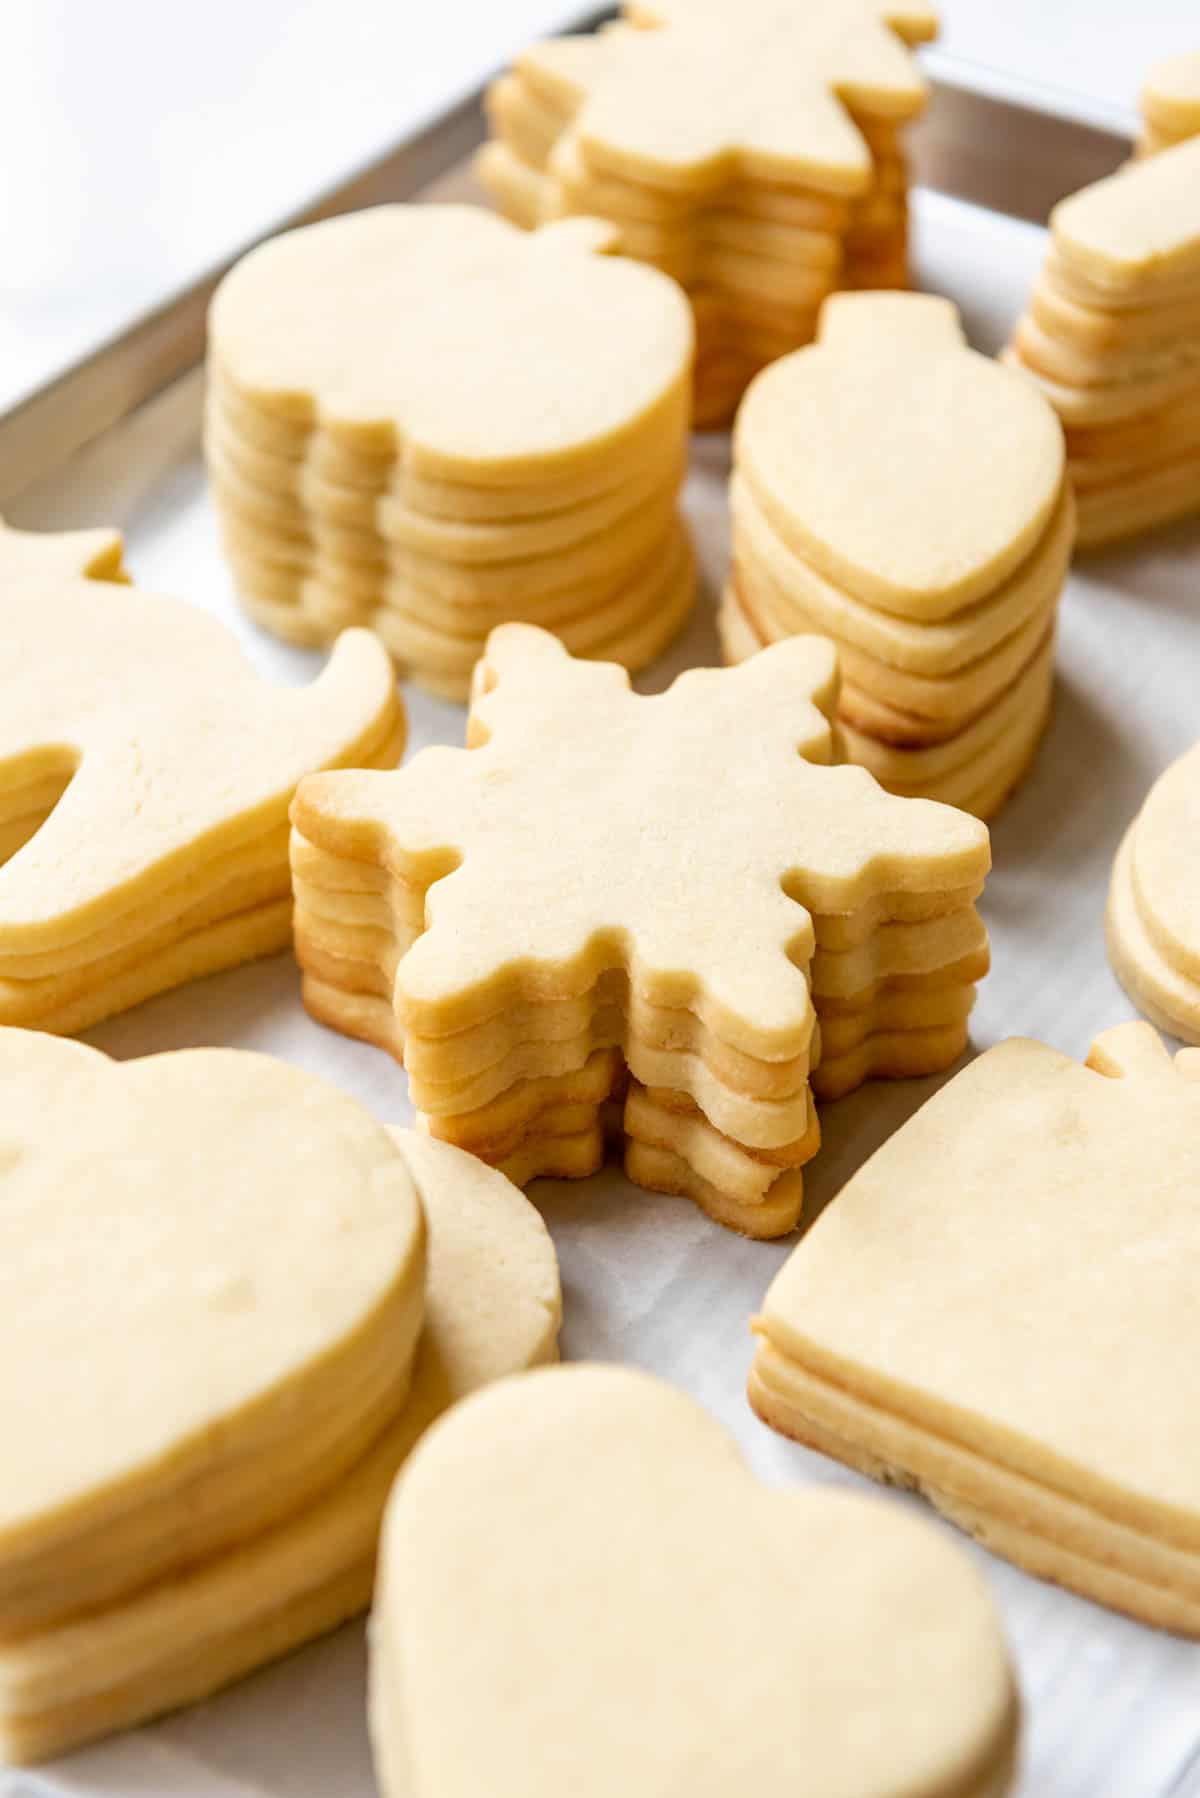 Stacks of cut out sugar cookies in shapes for different holidays on a baking sheet.